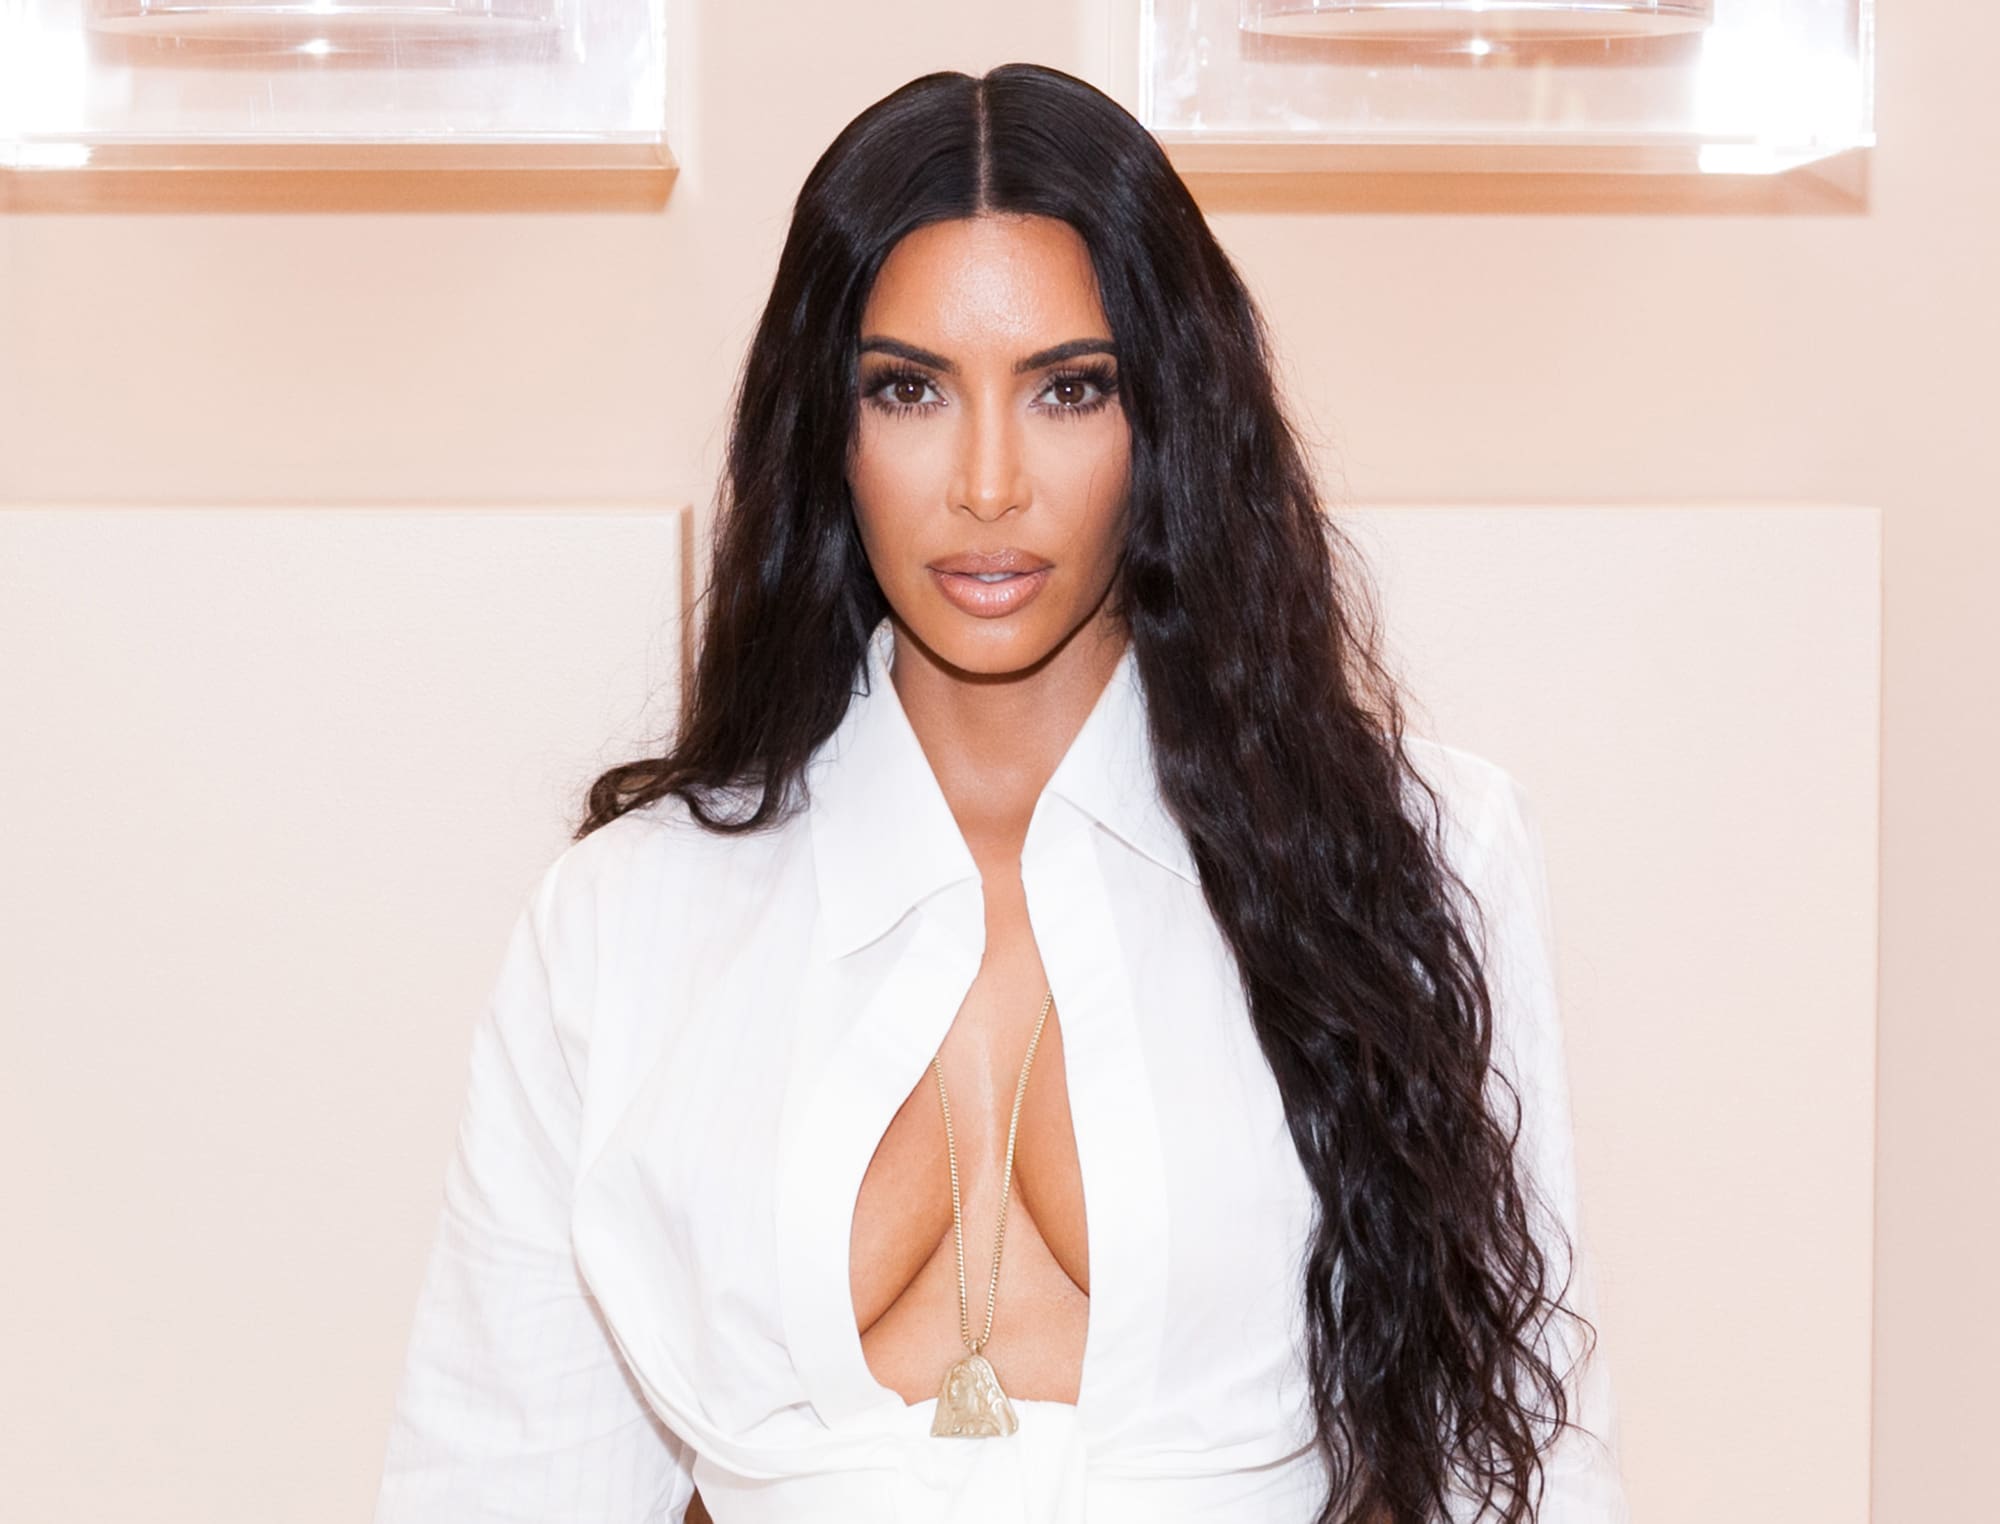 Kim Kardashian Is Reportedly Worried That Alexis Skyy Is Just Using Rob Kardashian For Fame